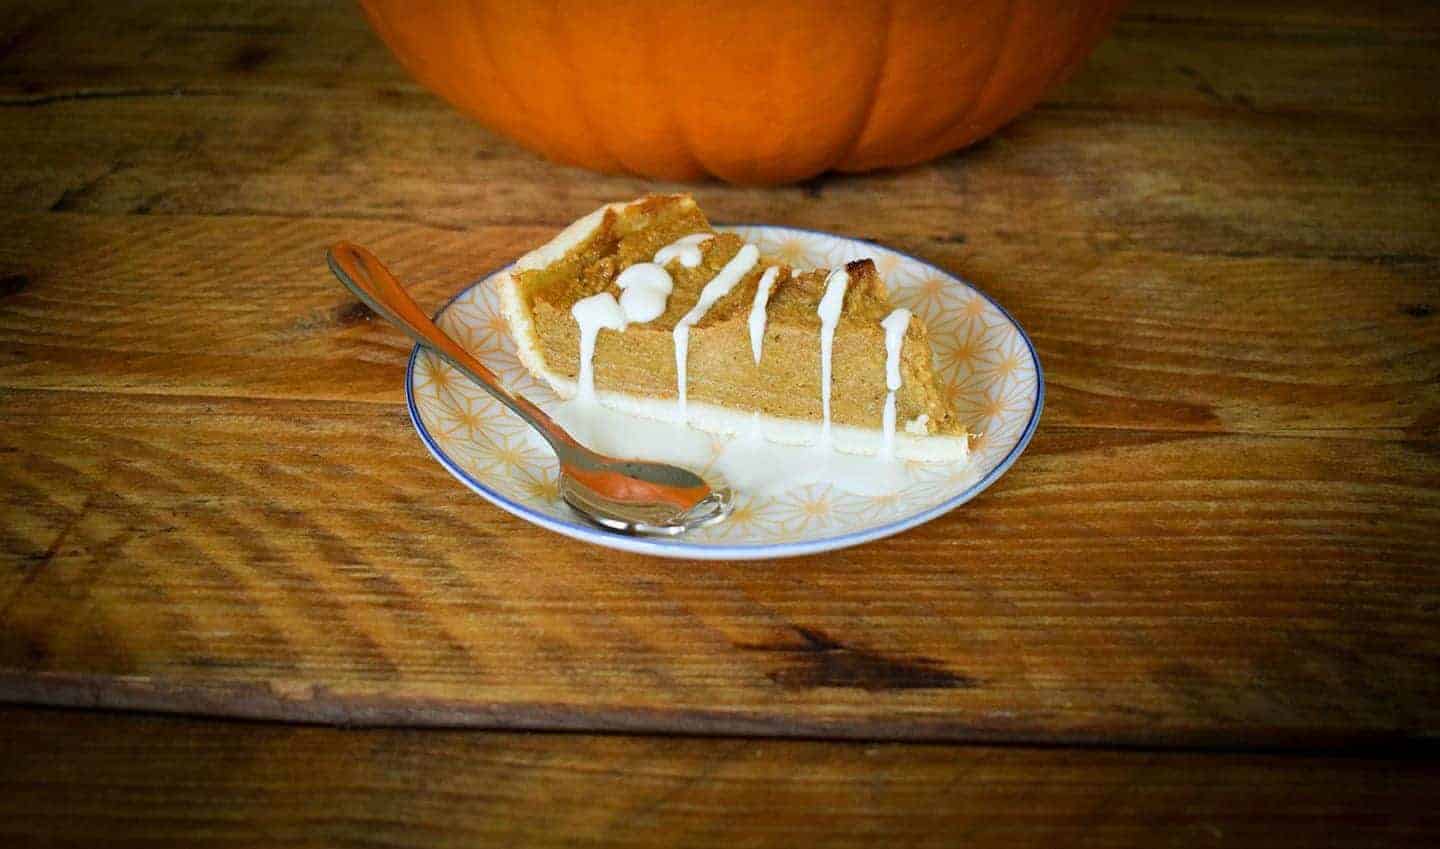 A slice of vegan pumpkin pie on a small plate in front of a pumpkin that can be seen in the background